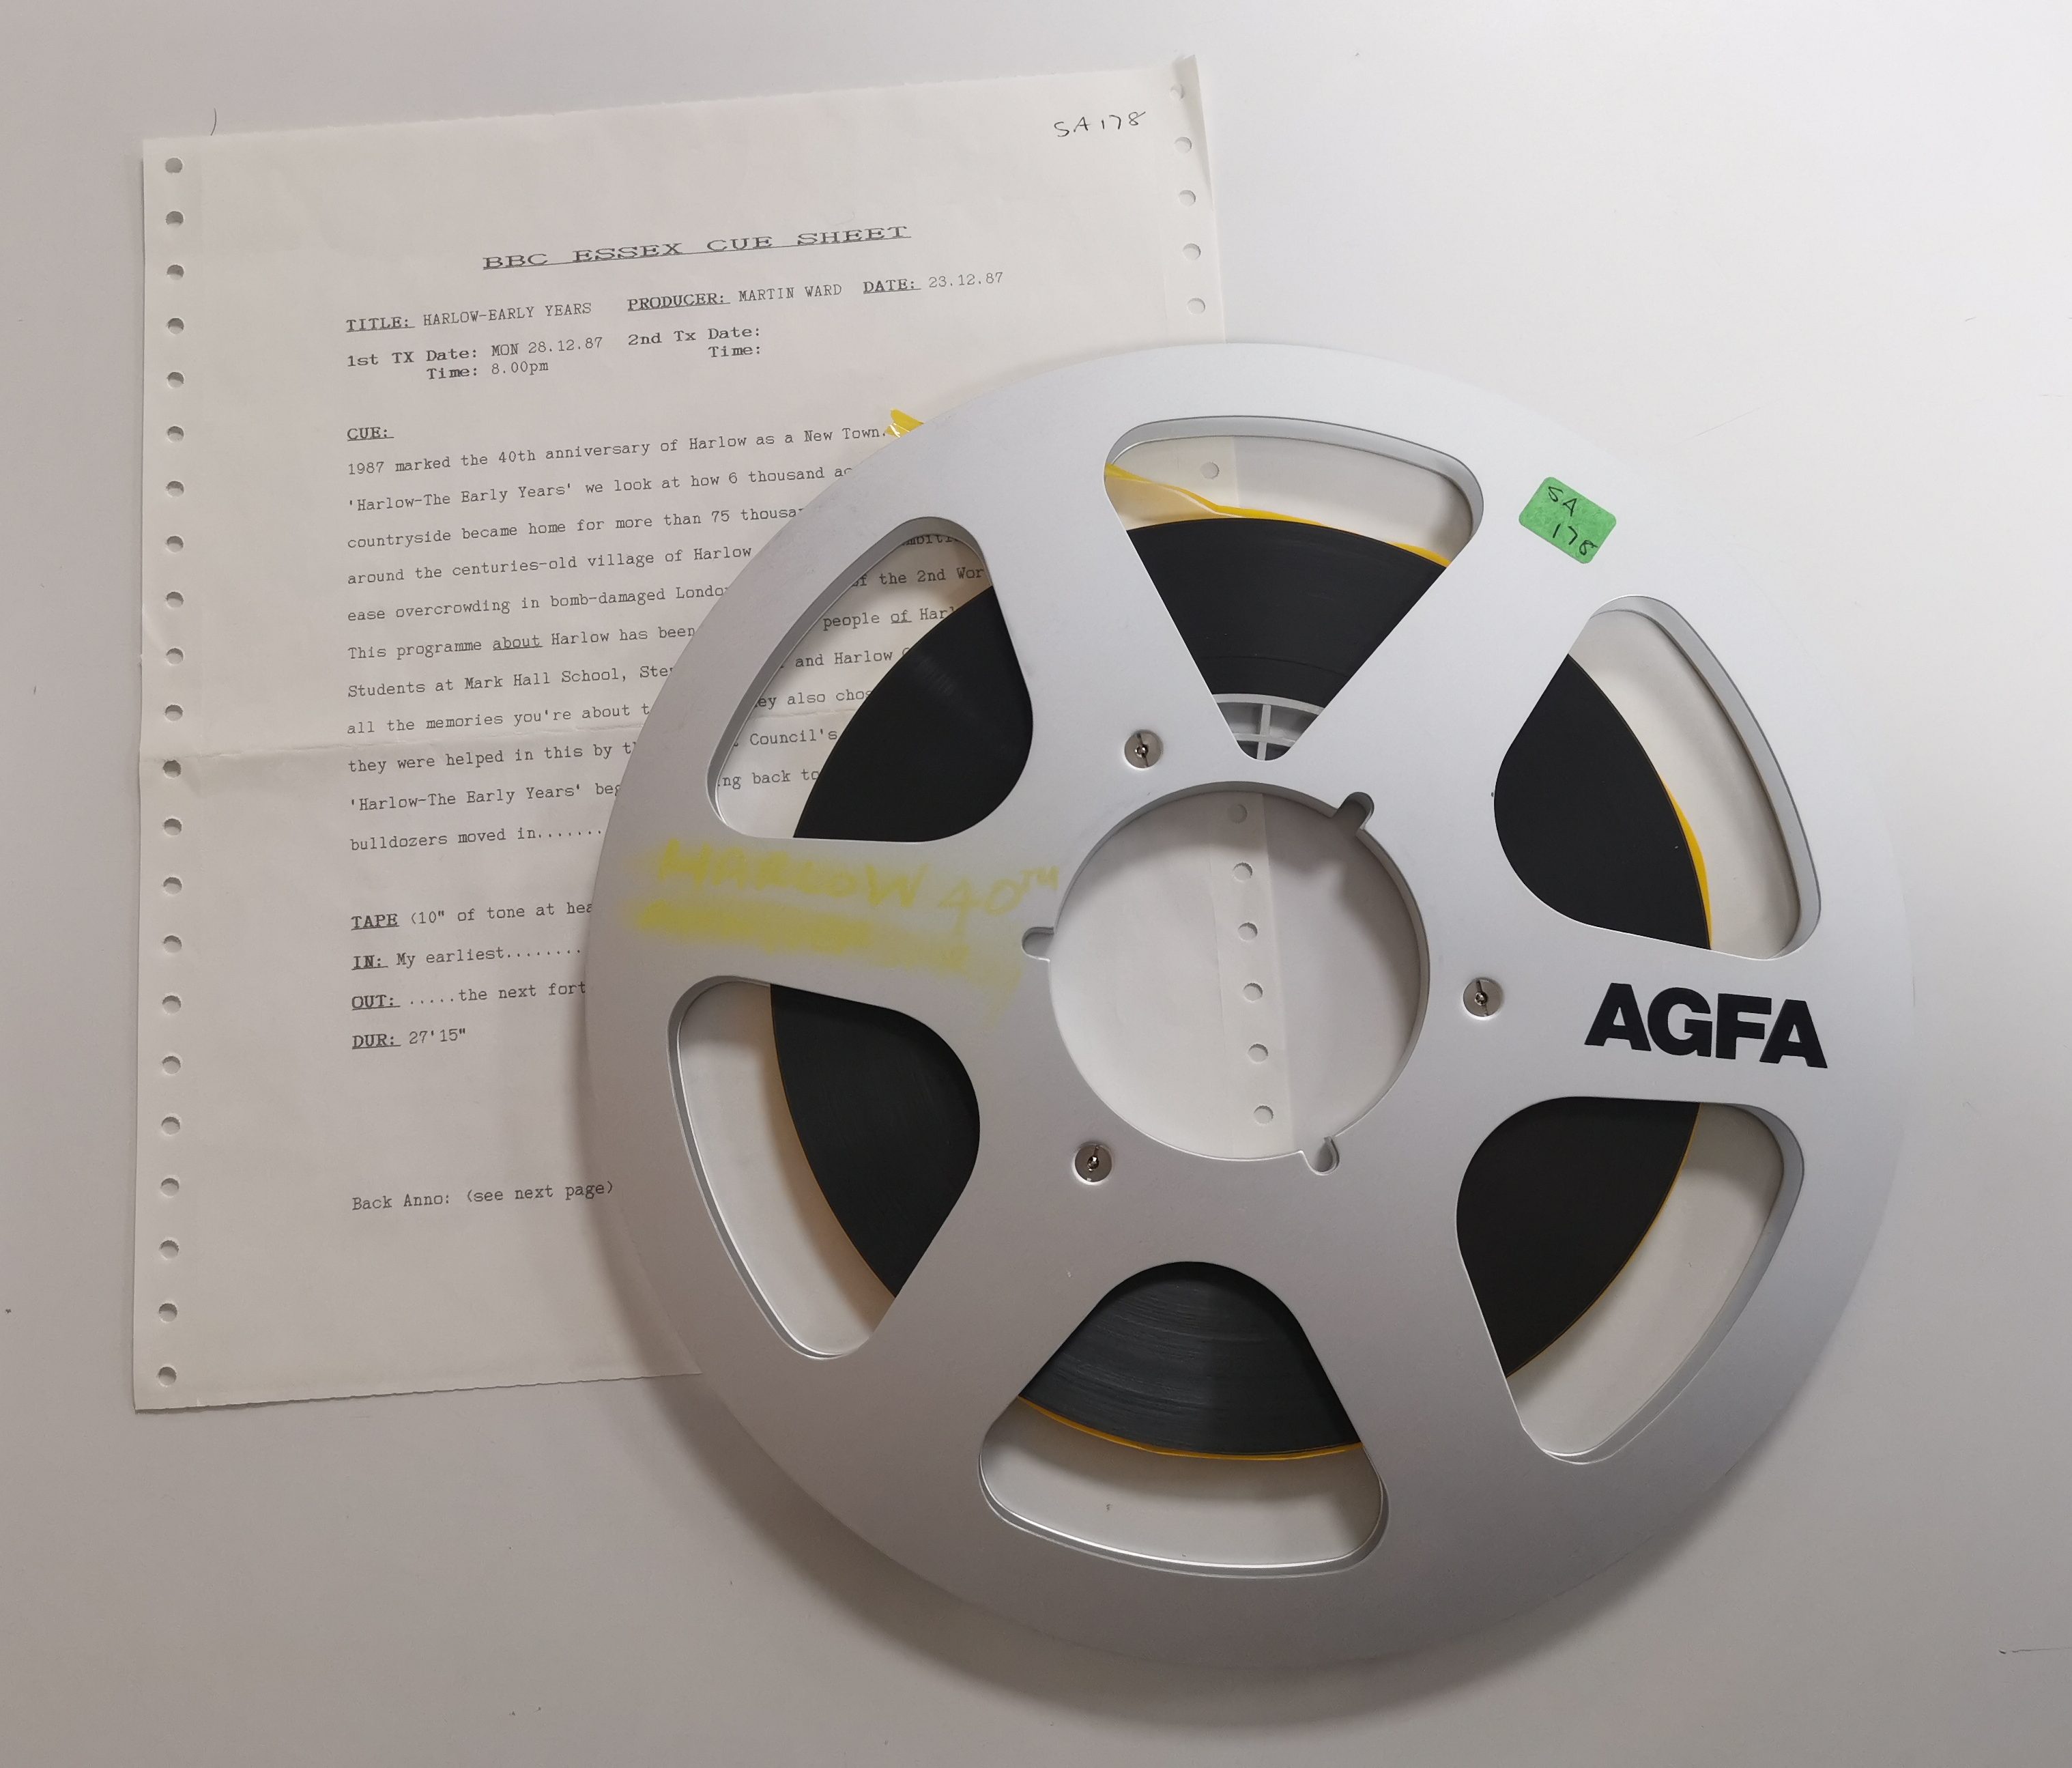 Image from above of AGFA tape reel, on top of paper BBC Essex cue sheet.